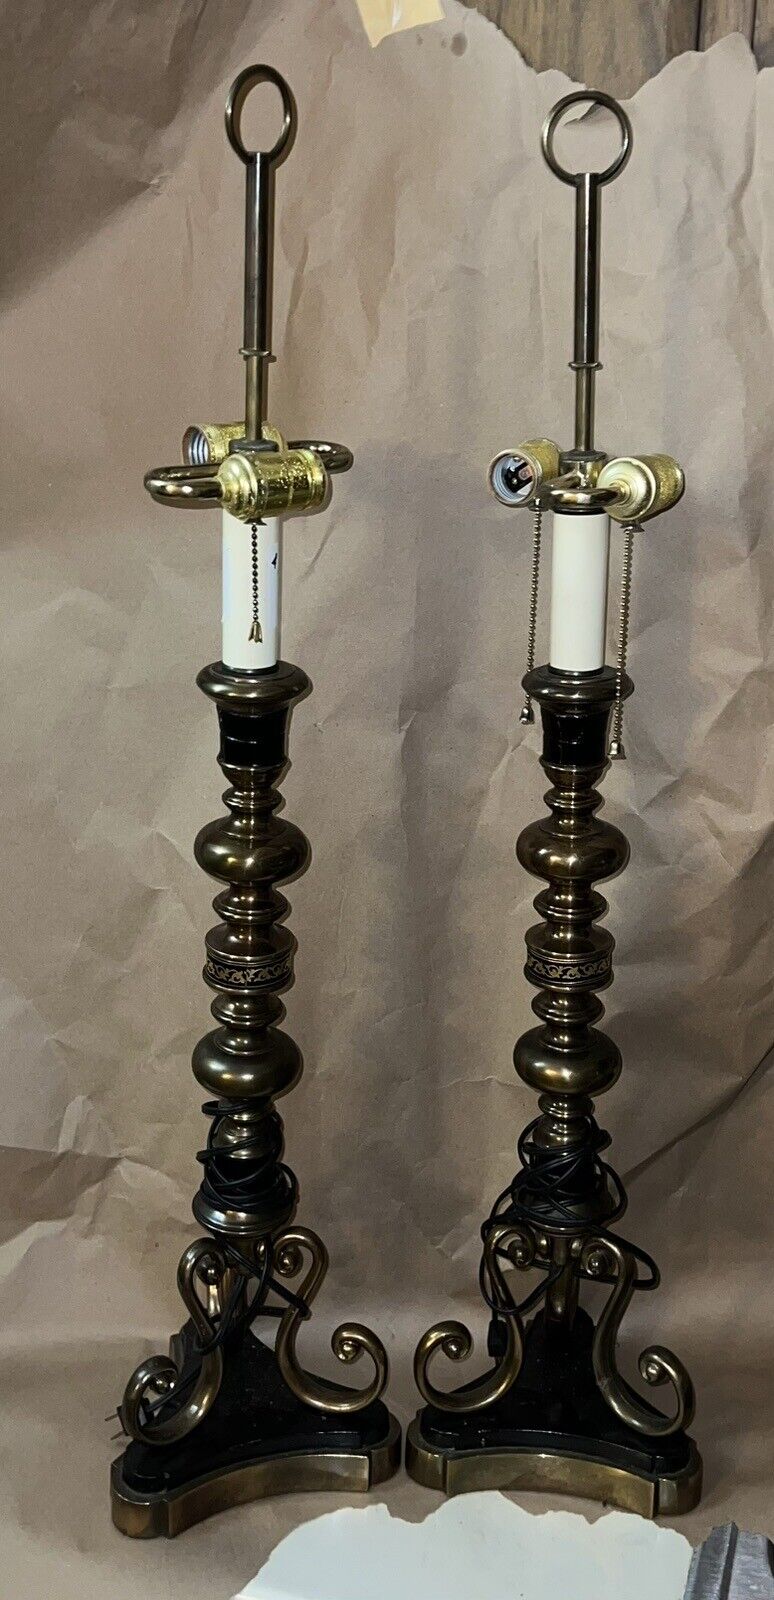 Large 36” Pair of Antique Leather & Giltwood Baluster Table Lamp